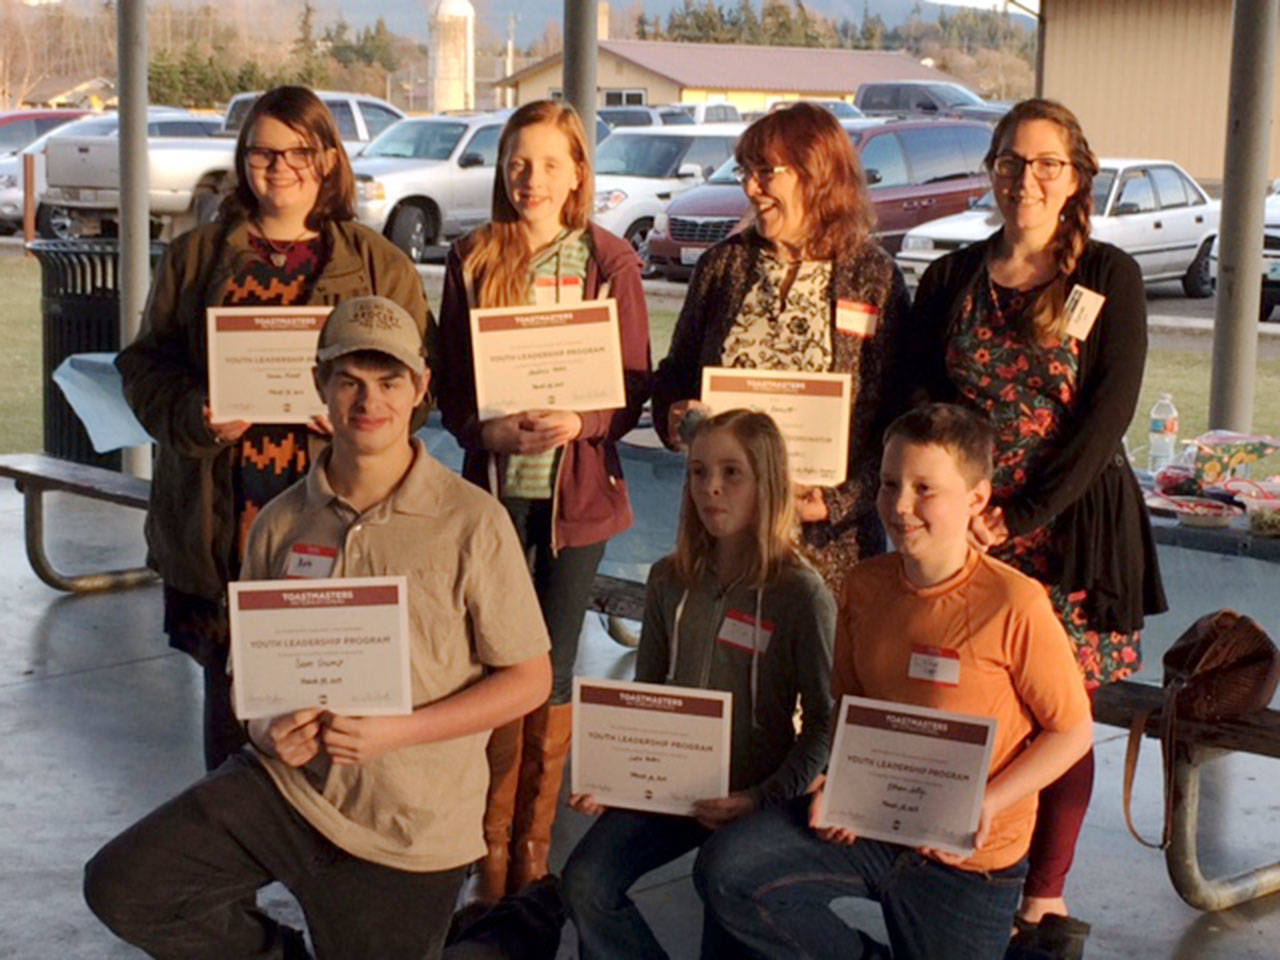 Milestone: Local youths grow communication, leadership skills with Toastmasters